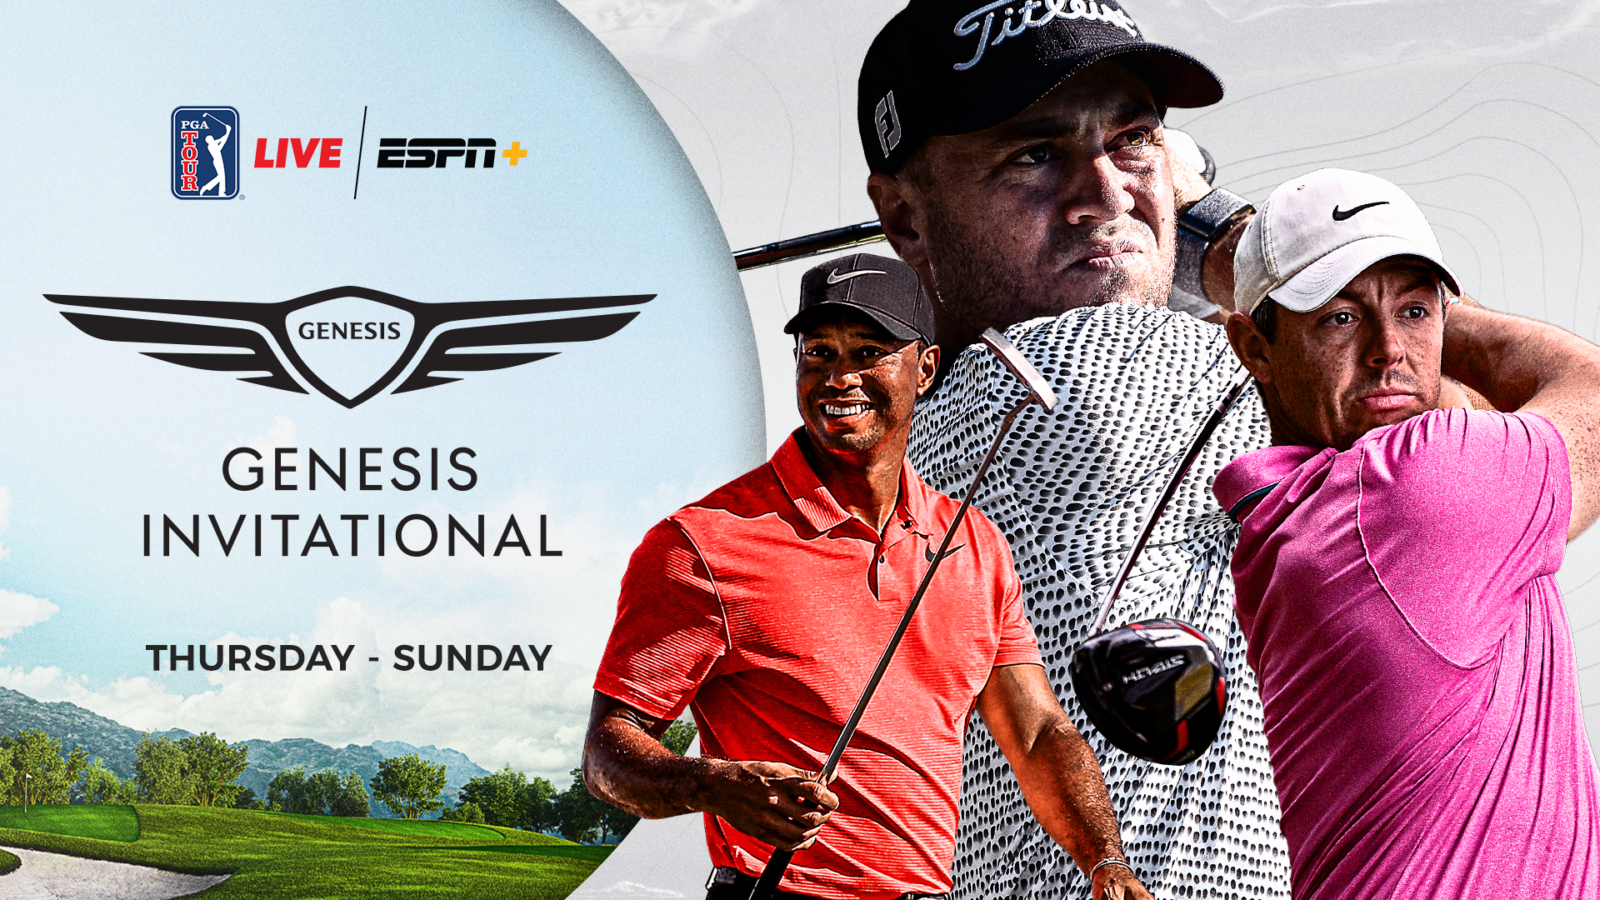 Tiger, Rory and JT, Oh My! Trio Among Attractions In ESPN+s Genesis Invitational Coverage This Week